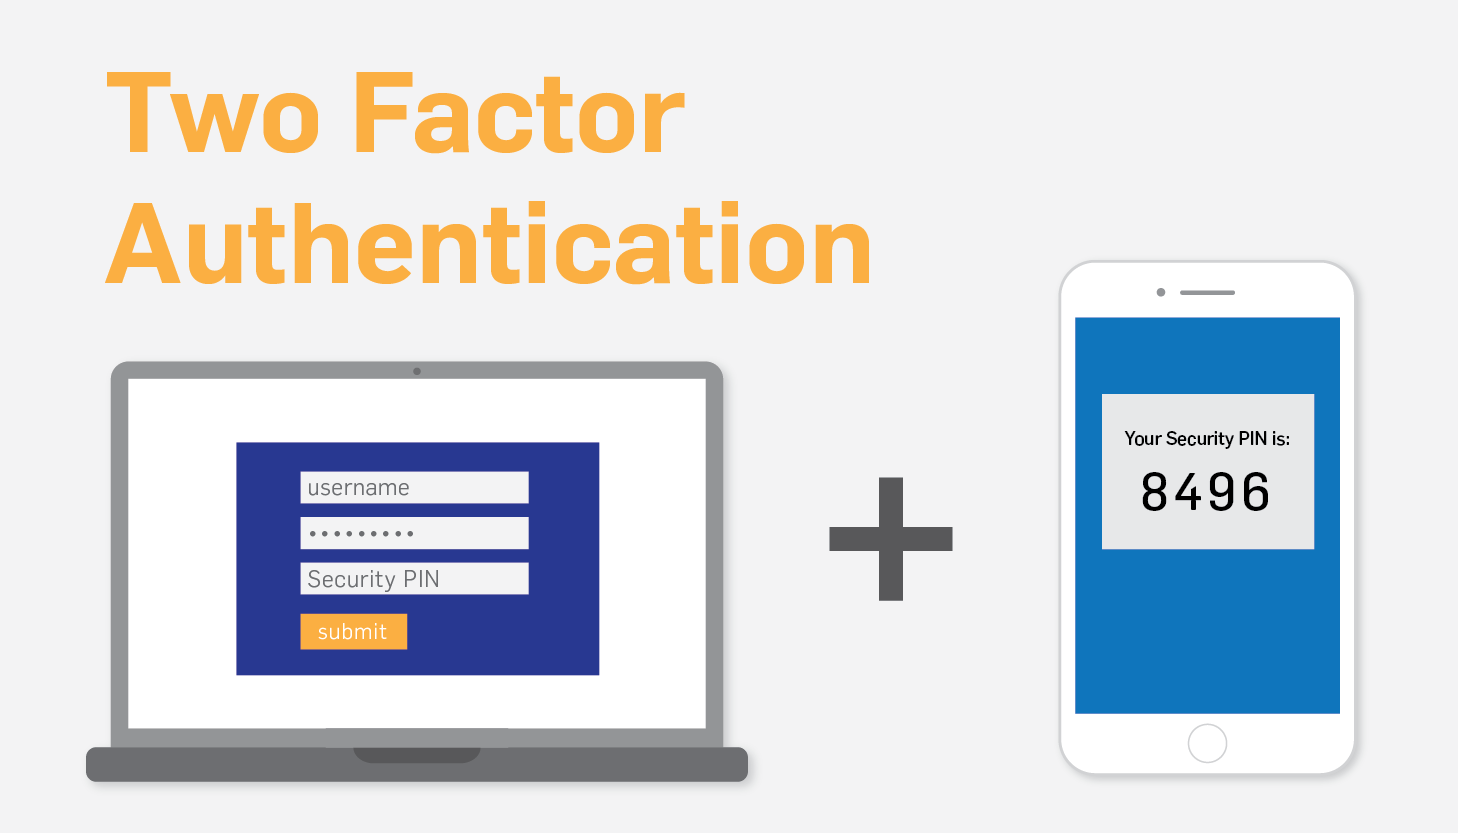 Authentication (Single Factor) and Multifactor Authorization